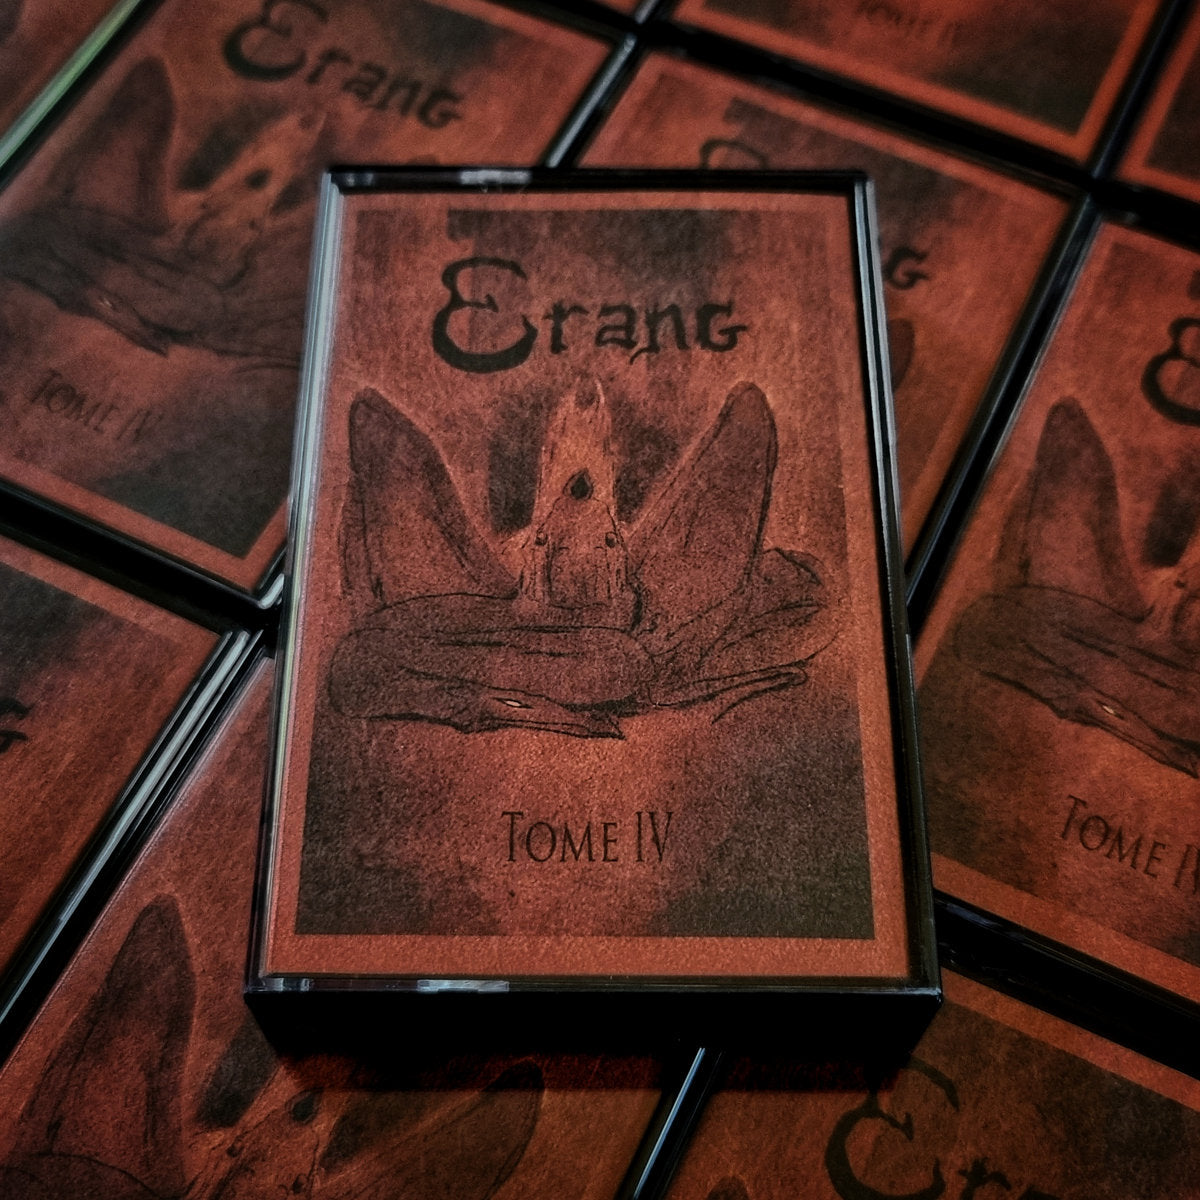 [SOLD OUT] ERANG "Tome IV" Cassette Tape (lim.150)